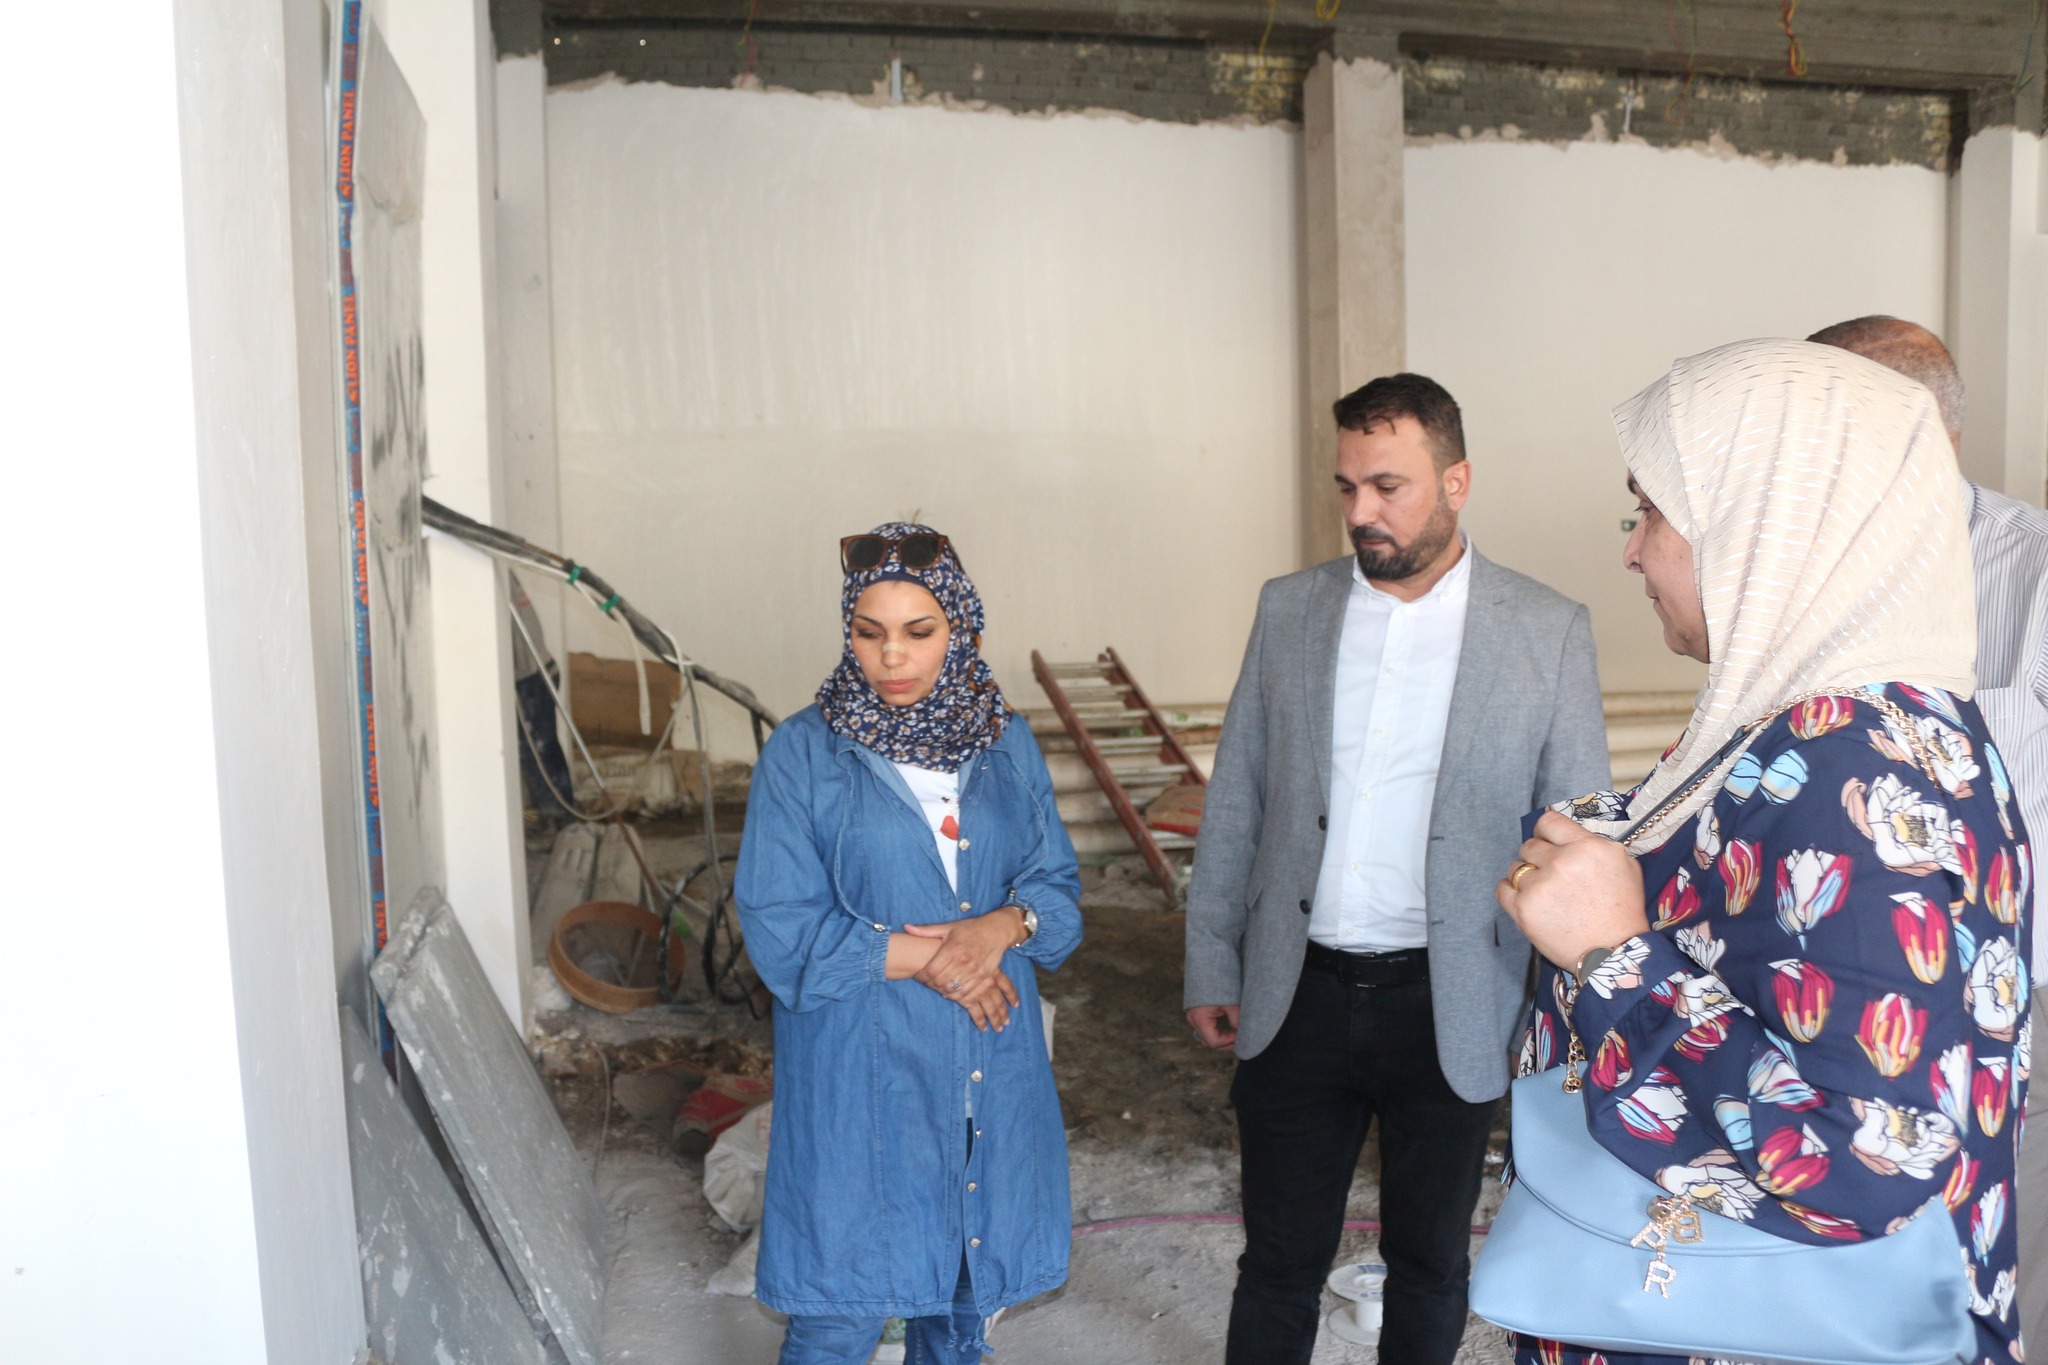 Mr. Director General explains that the current work is the completion of all parts of the cultural center building project in Al-Kadhimiya, Baghdad Governorate